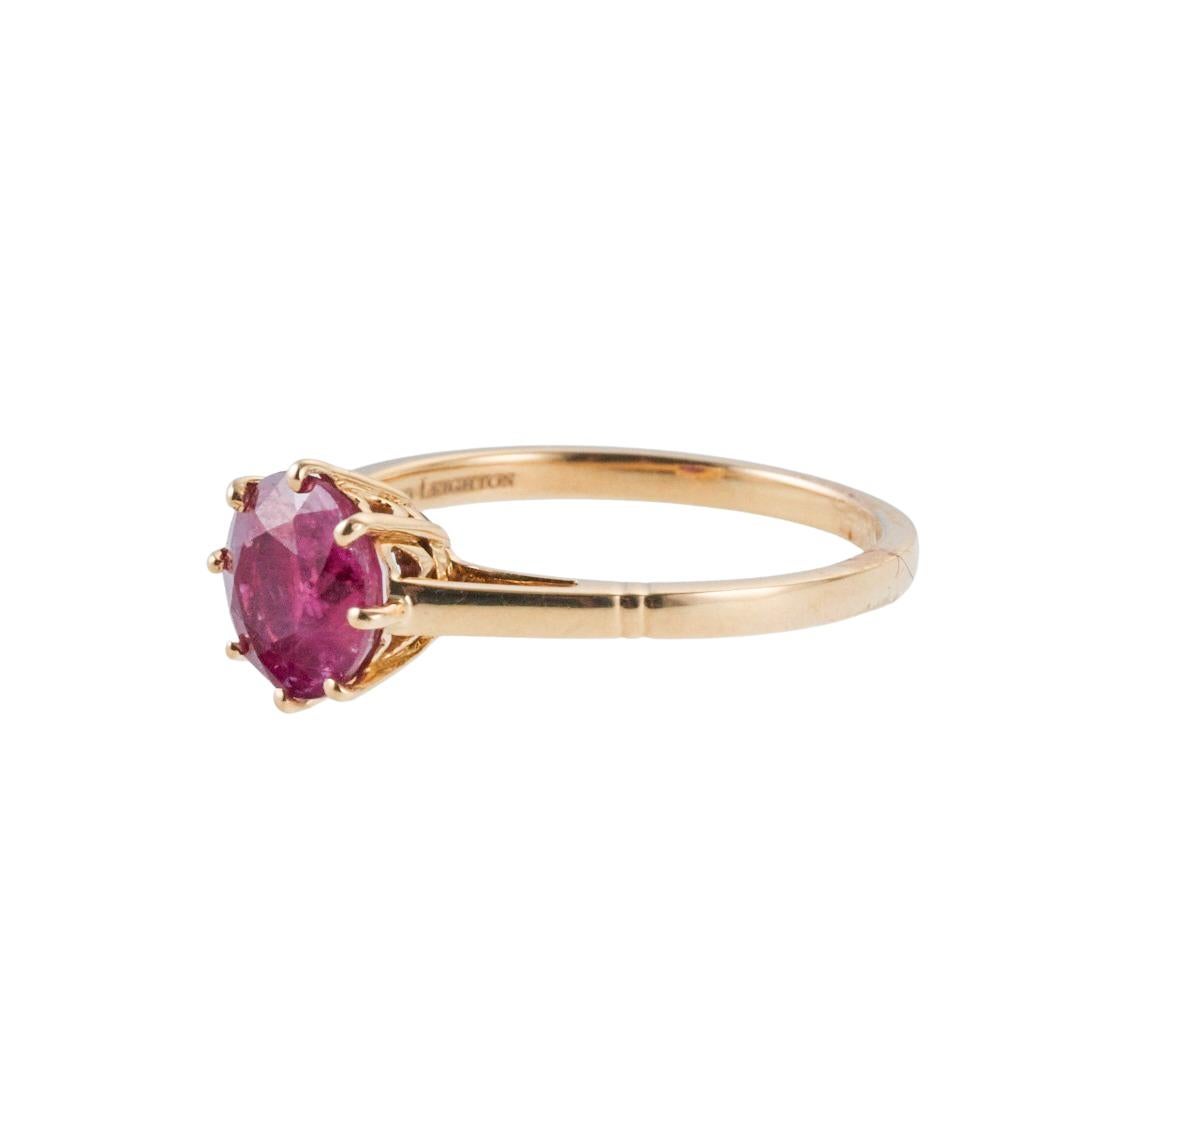 18k yellow gold ring setting by Fred Leighton, set with C. Dunaigre if Switzerland certificate for the ruby - approx. 1.50ct, stone measures approx. 6.80 x 6.80 x 3.90mm. Ring size 5.25. Ring hallmarked 750, Fred Leighton. Weight of the piece - 2.5